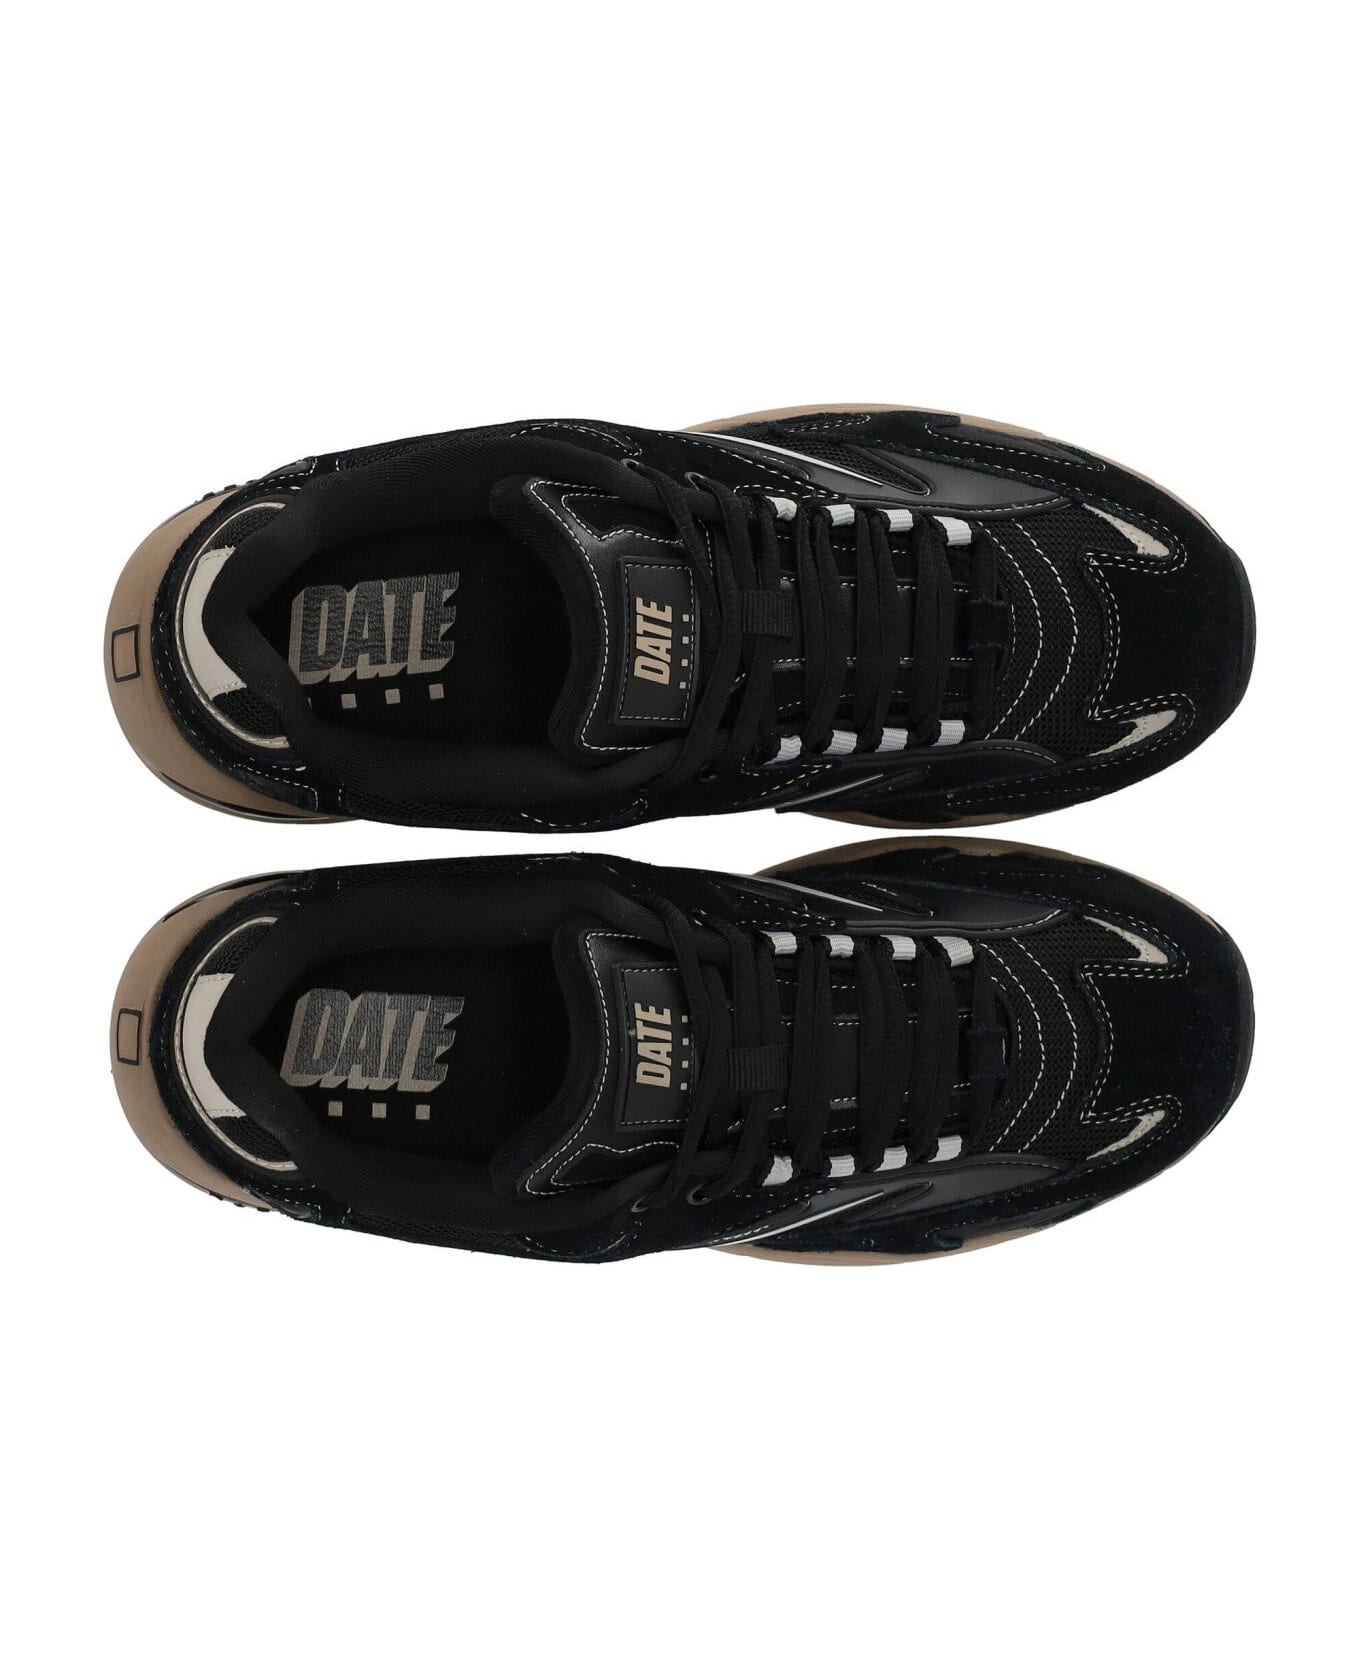 D.A.T.E. Sn 23 Collection Sneakers In Black Suede And Fabric - Nero スニーカー